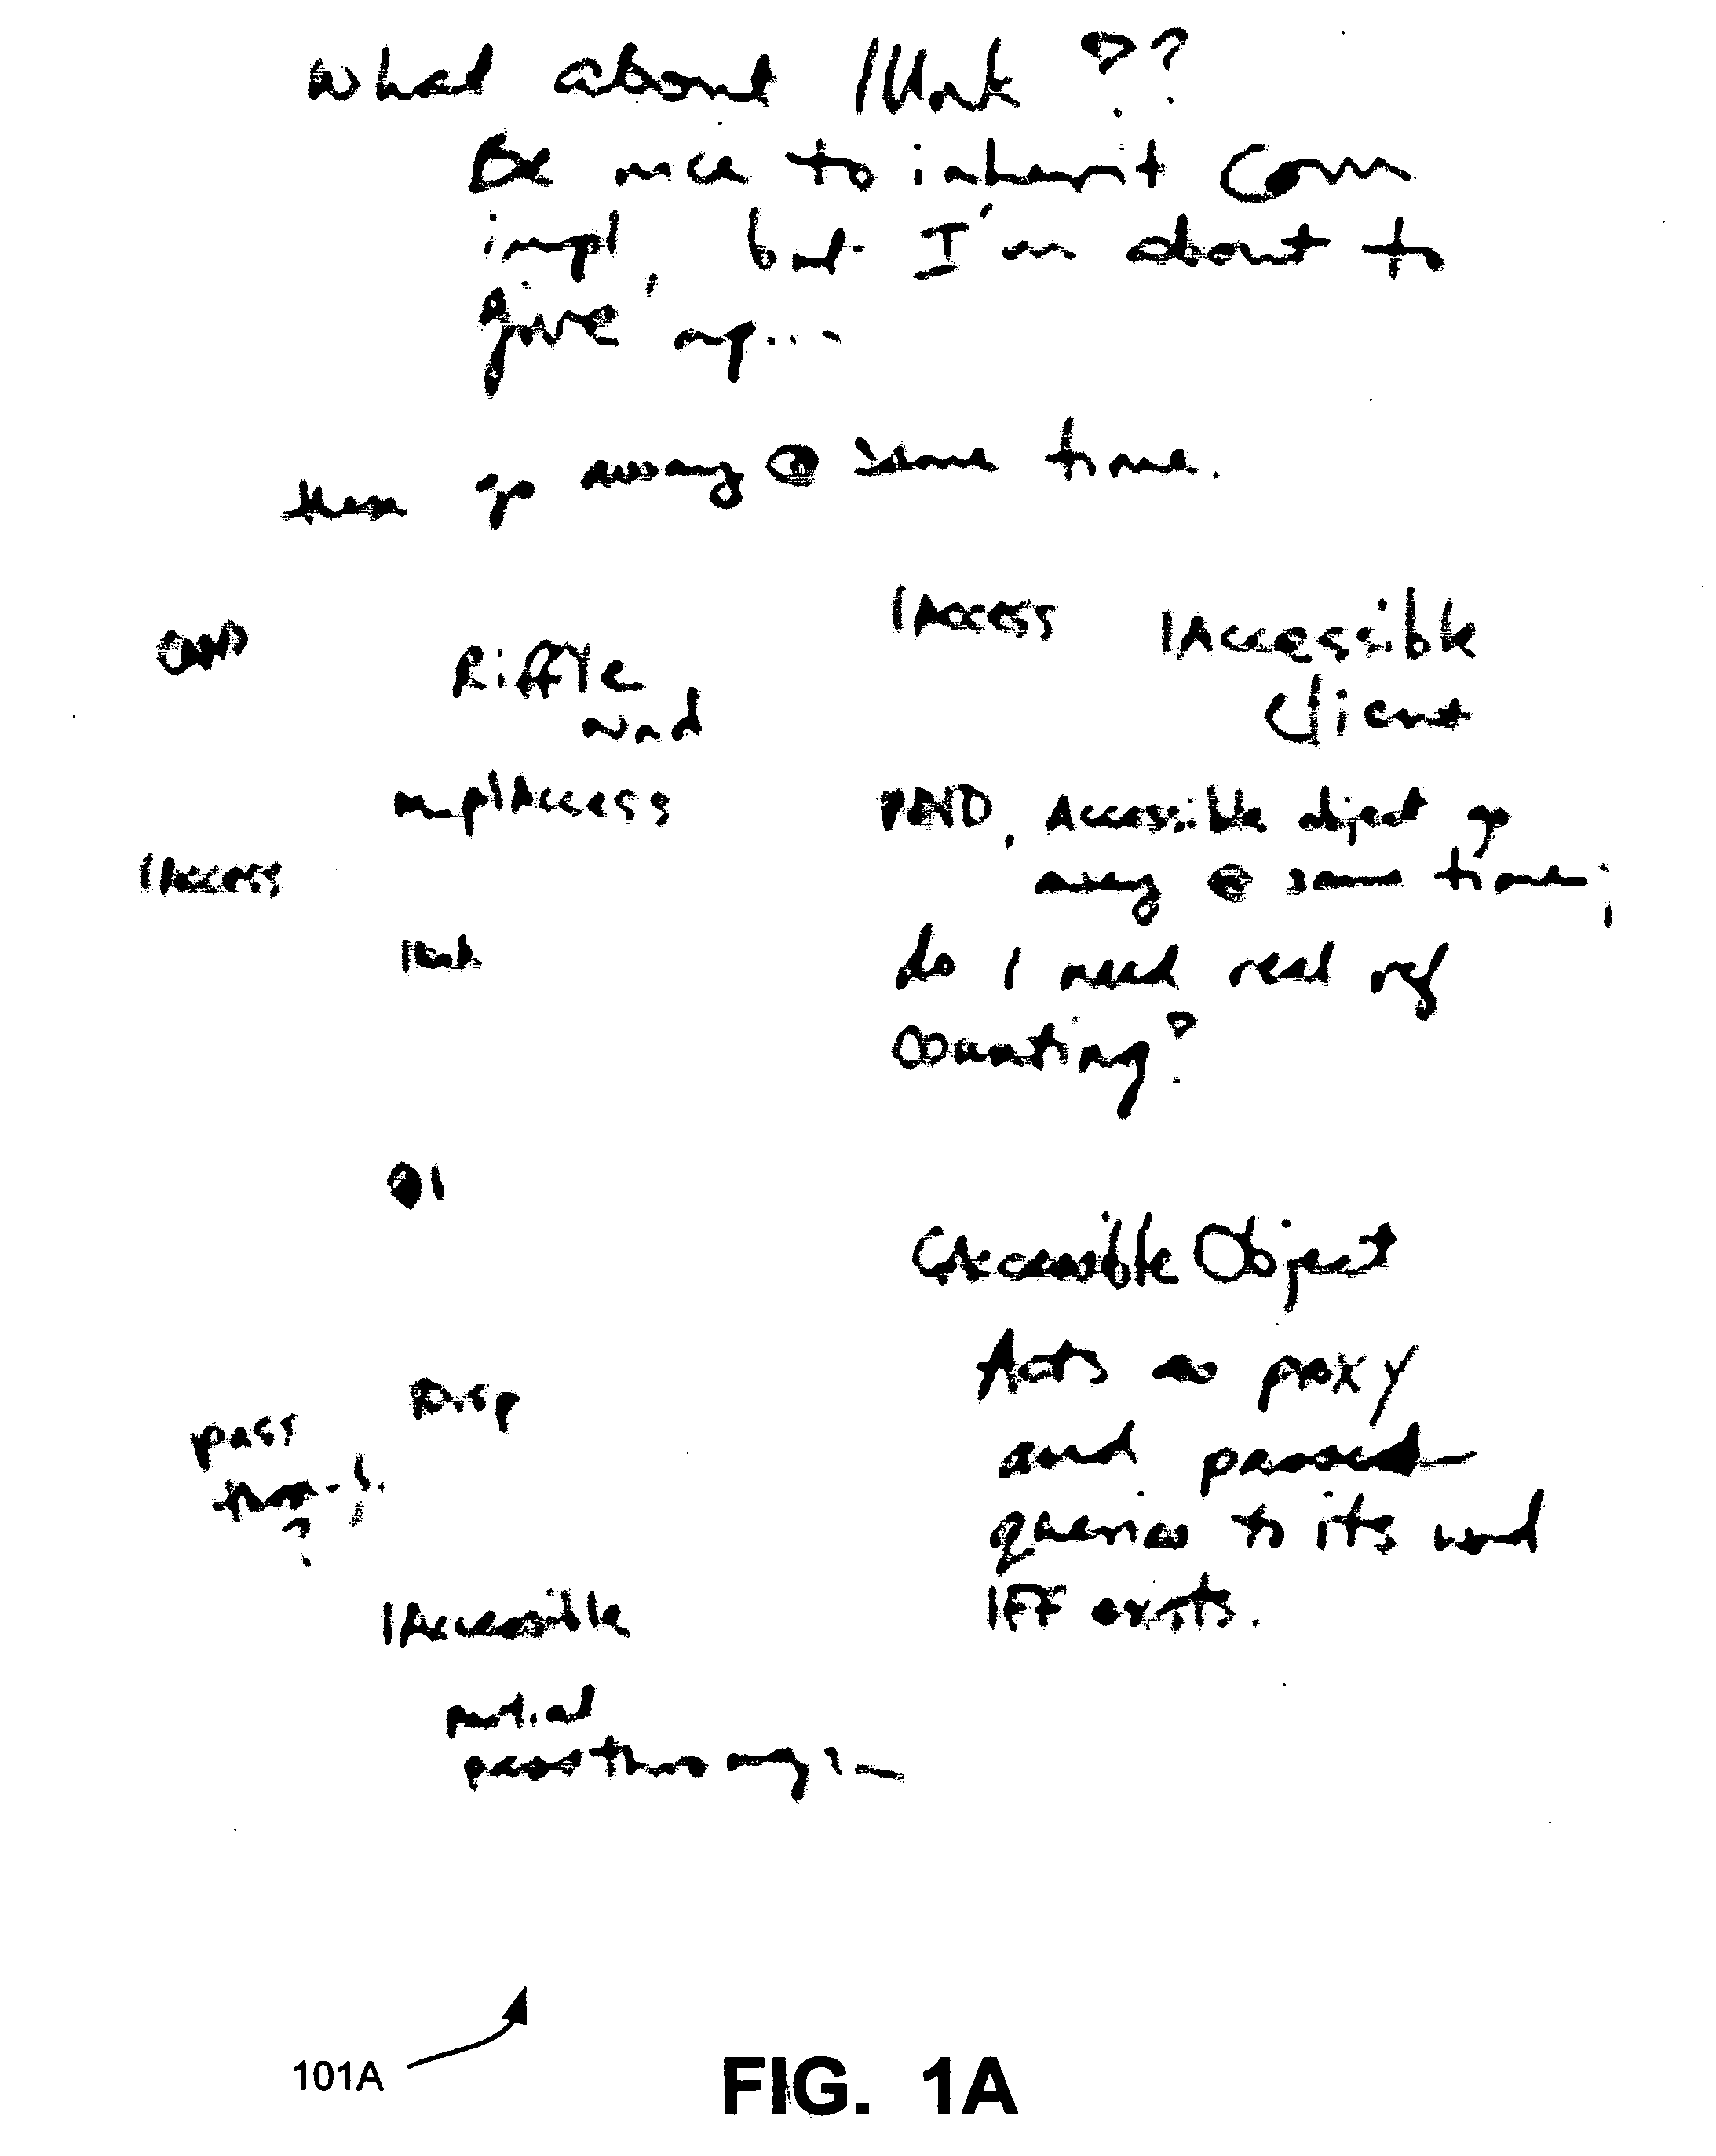 Grouping lines in freeform handwritten text